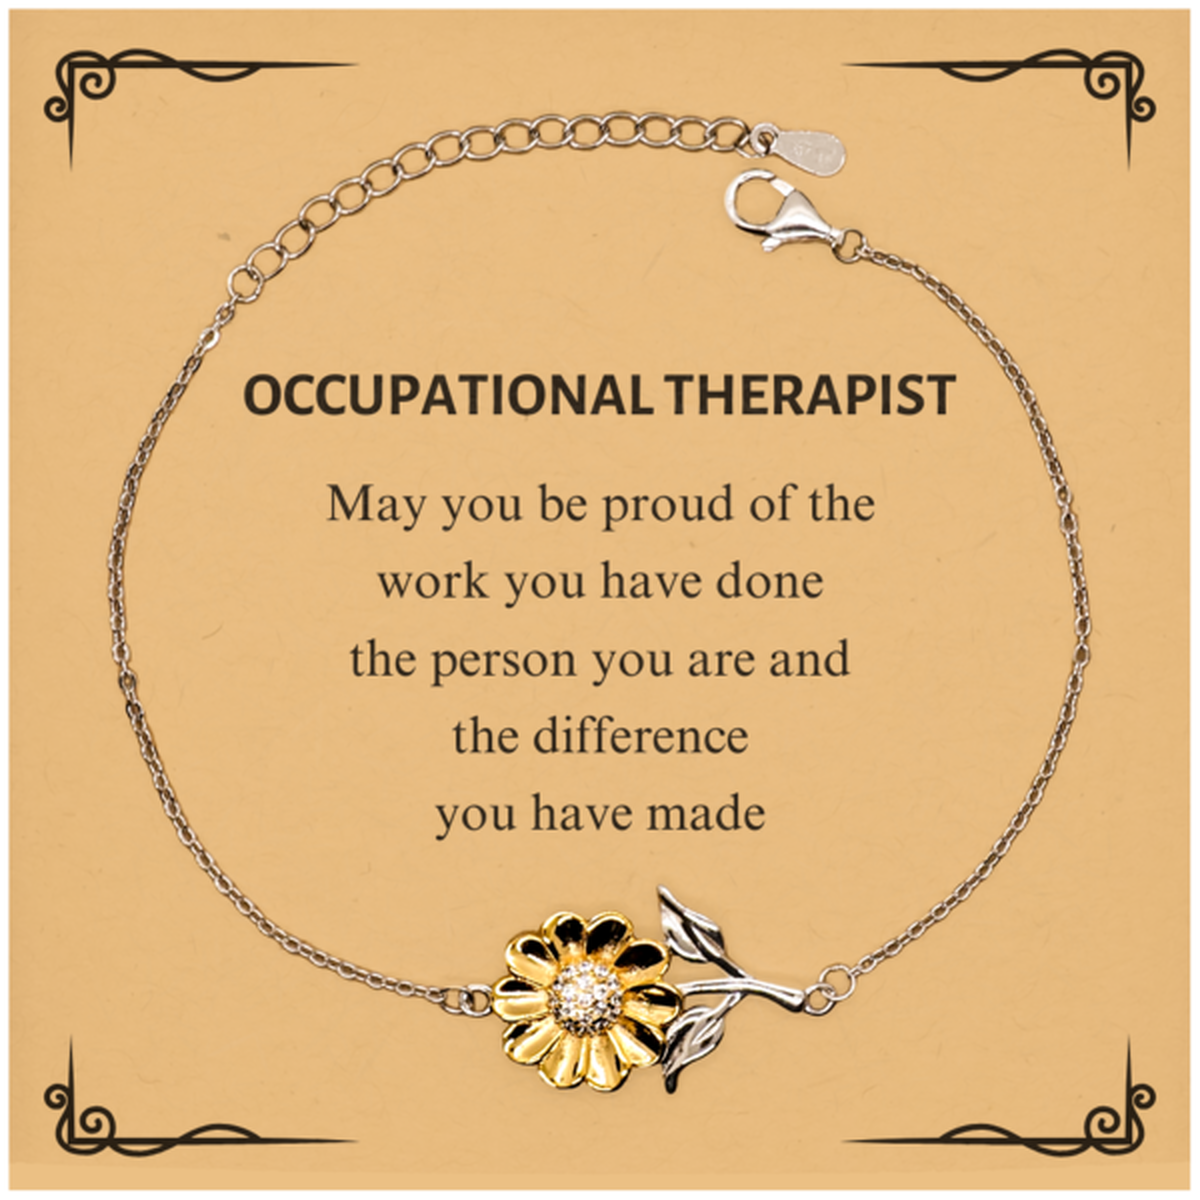 Occupational Therapist May you be proud of the work you have done, Retirement Occupational Therapist Sunflower Bracelet for Colleague Appreciation Gifts Amazing for Occupational Therapist